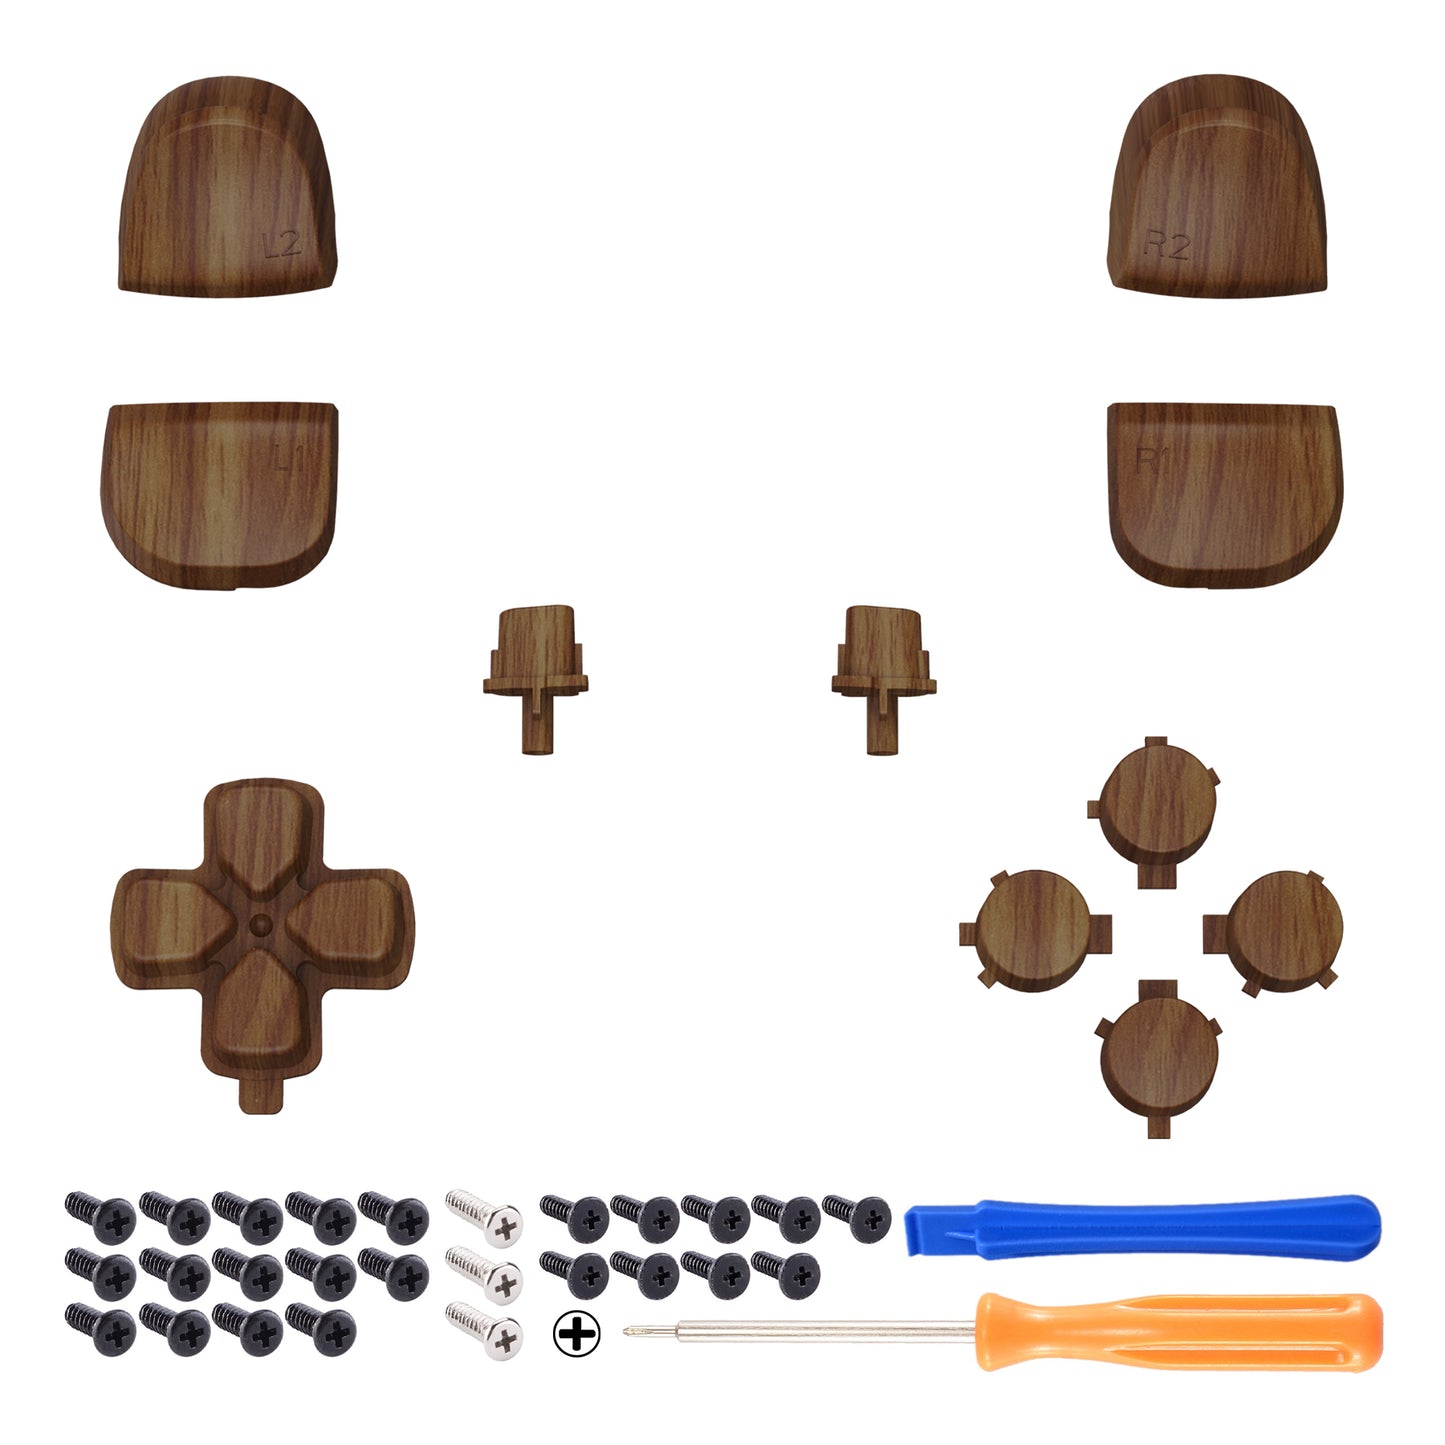 eXtremeRate Retail Replacement D-pad R1 L1 R2 L2 Triggers Share Options Face Buttons, Wood Grain Full Set Buttons Compatible With ps5 Controller BDM-010 & BDM-020 - JPF9001G2